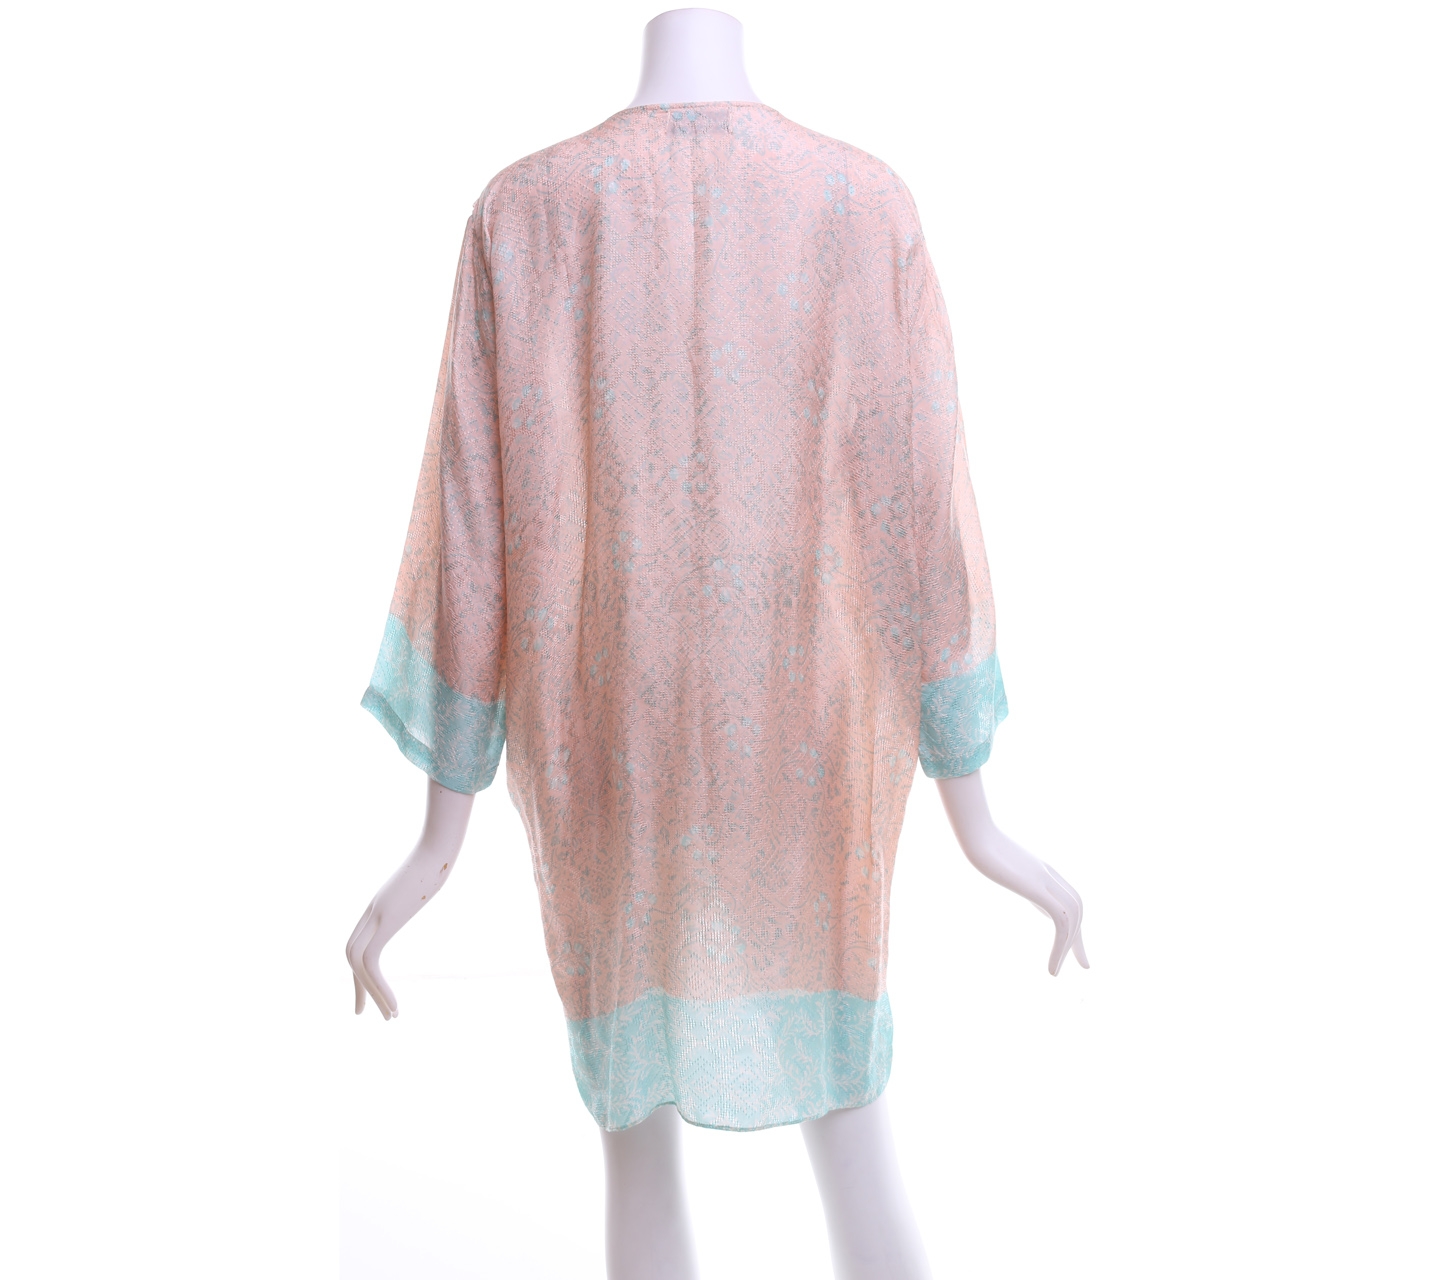 Almaina Peach And Tosca Tunic Patterned Blouse